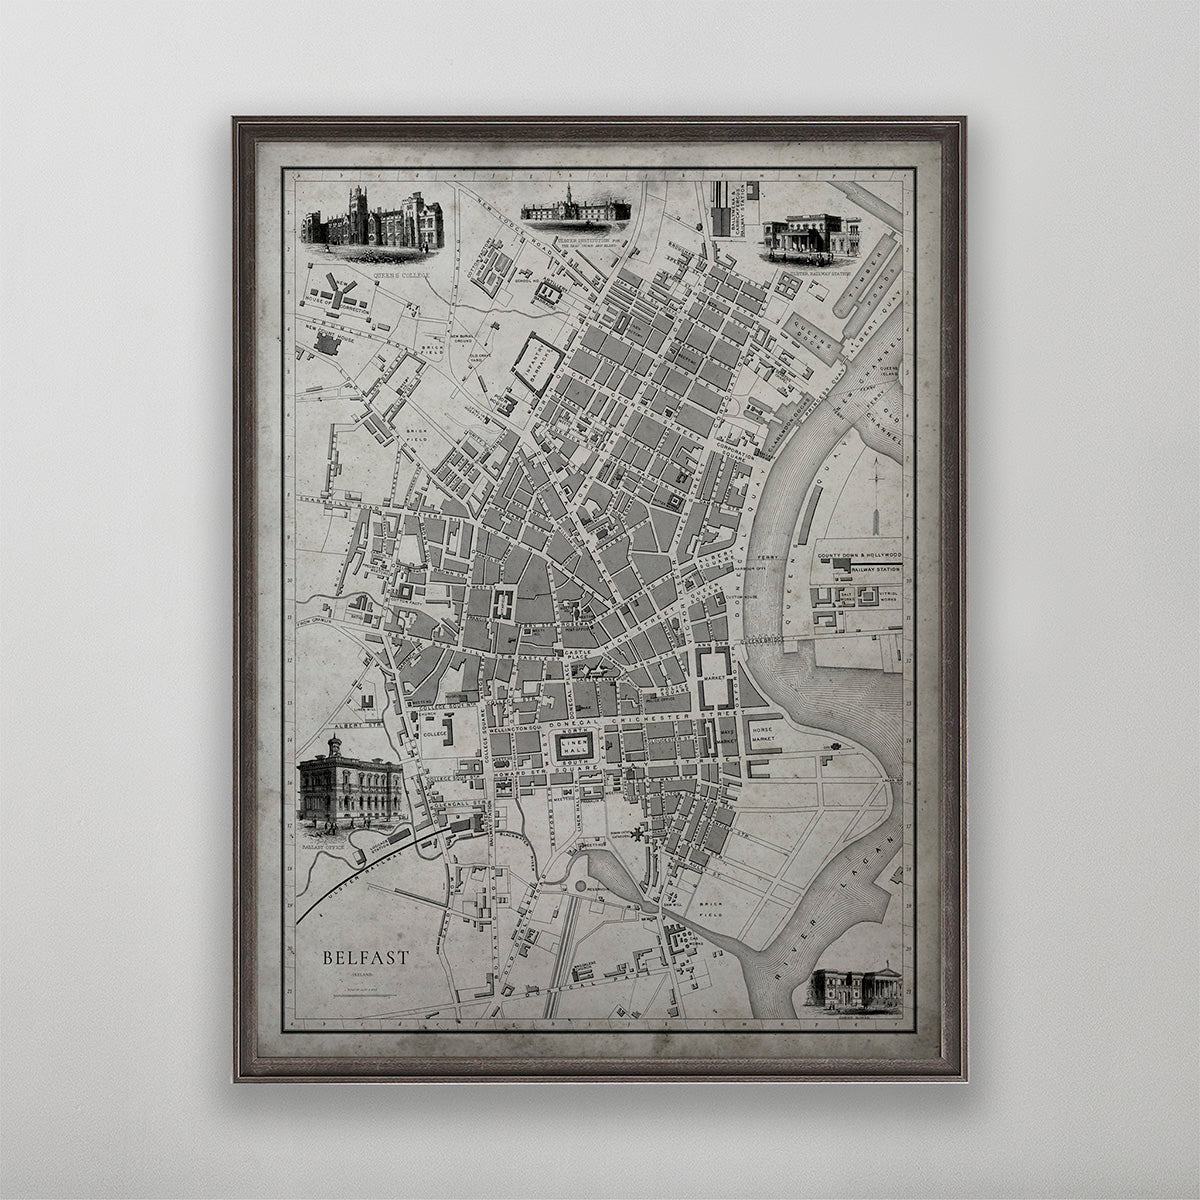 Old vintage historic map of Belfast for wall art home decor. 